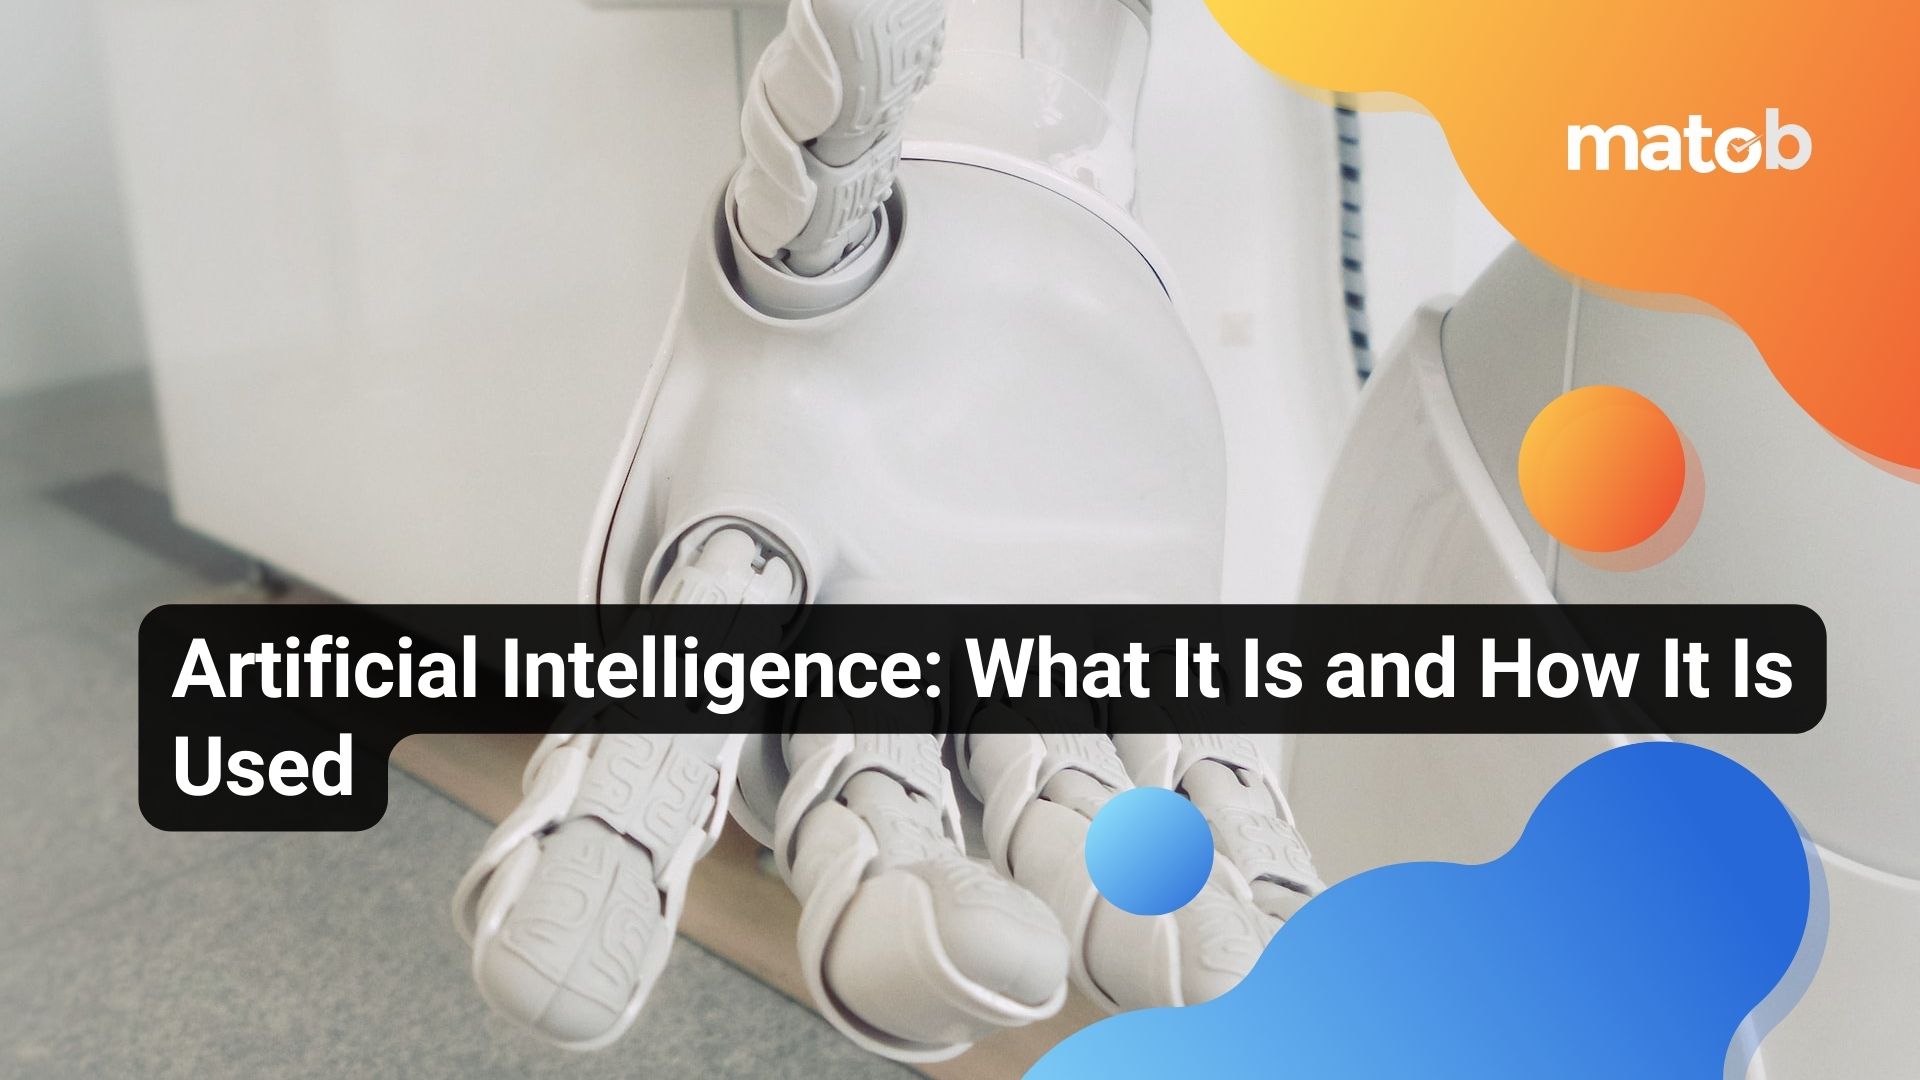 Artificial Intelligence: What It Is and How It Is Used